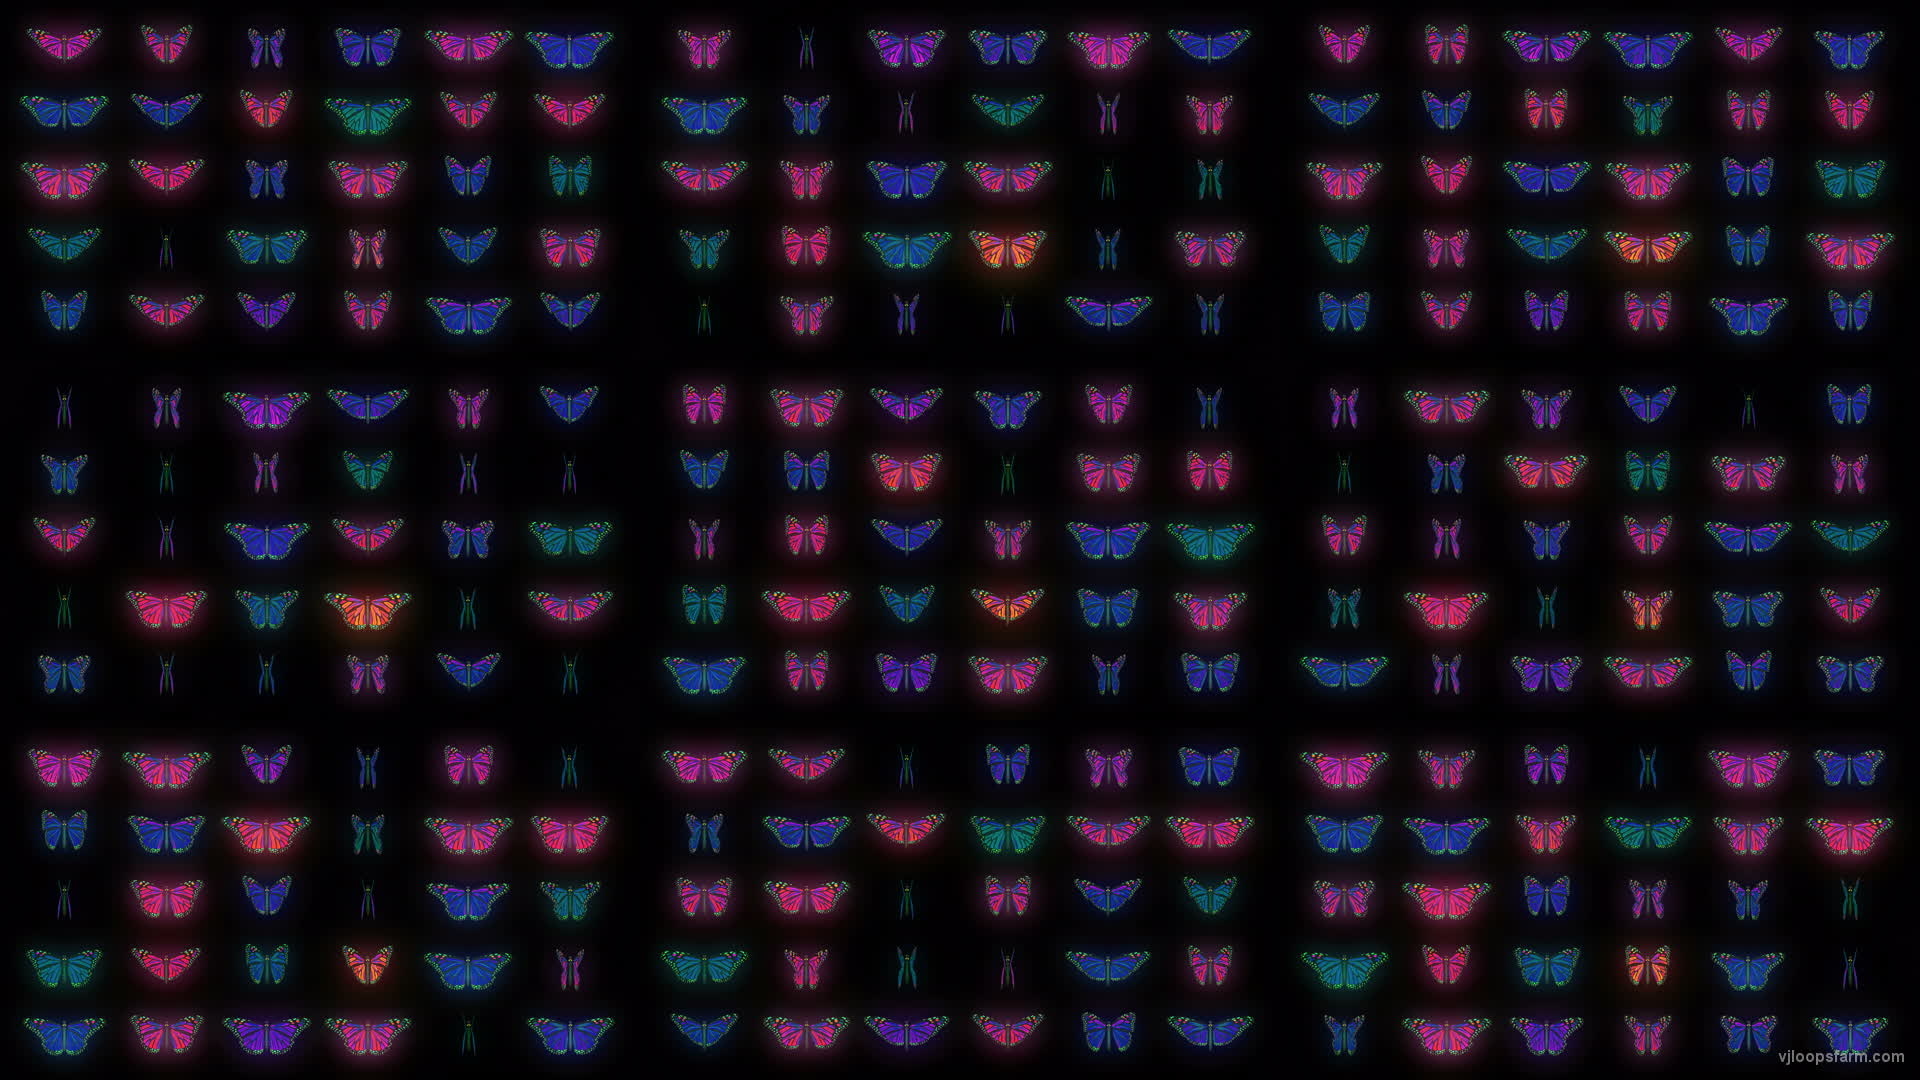 Color Psychedelic Butterfly PSY random fly insects collection light pattern 4K Video Art VJ Loop